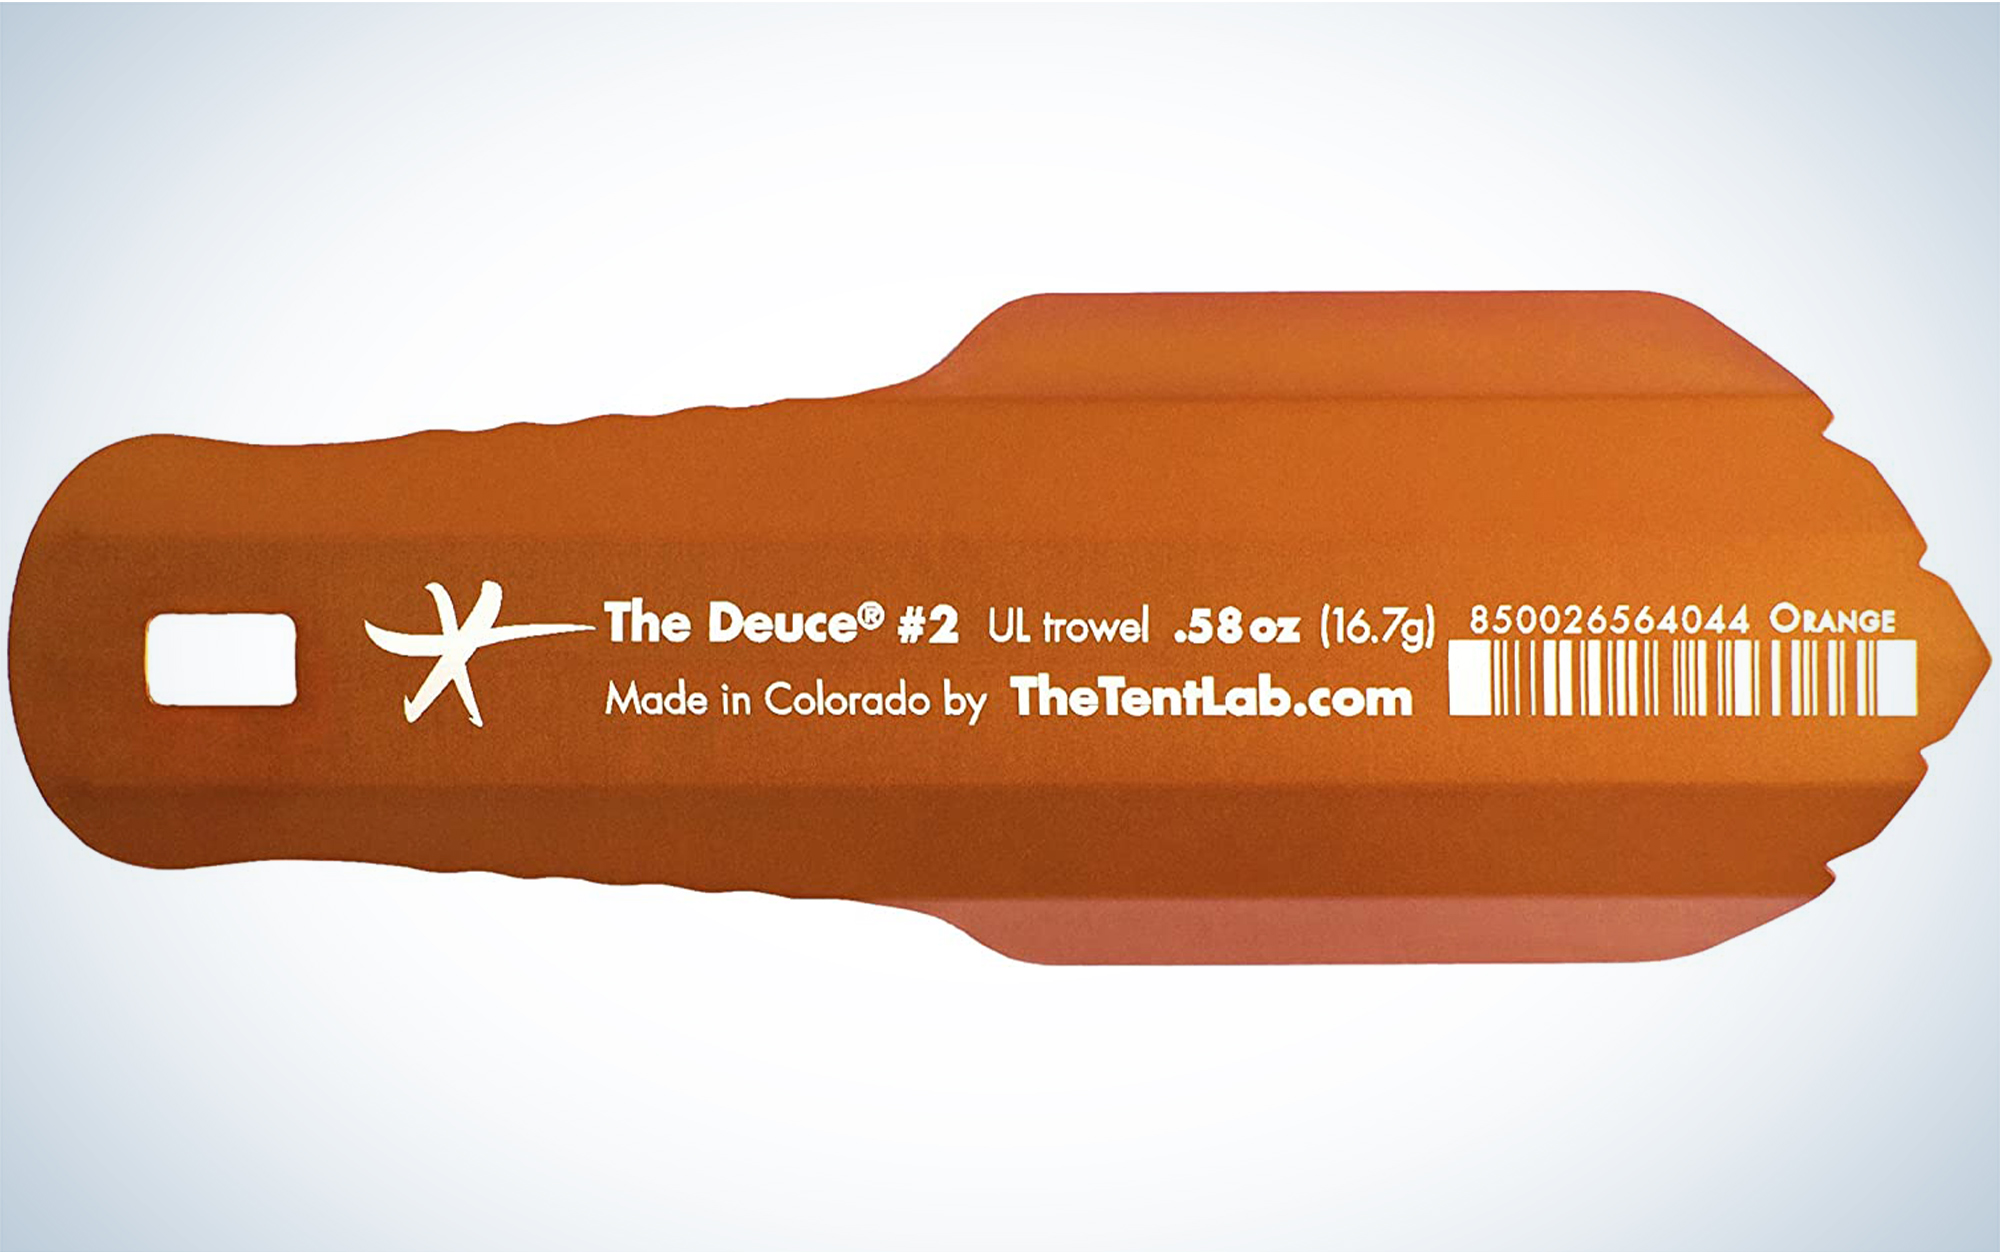 The TheTentLab The Deuce #2 is one of the best ultralight backpacking gear items.